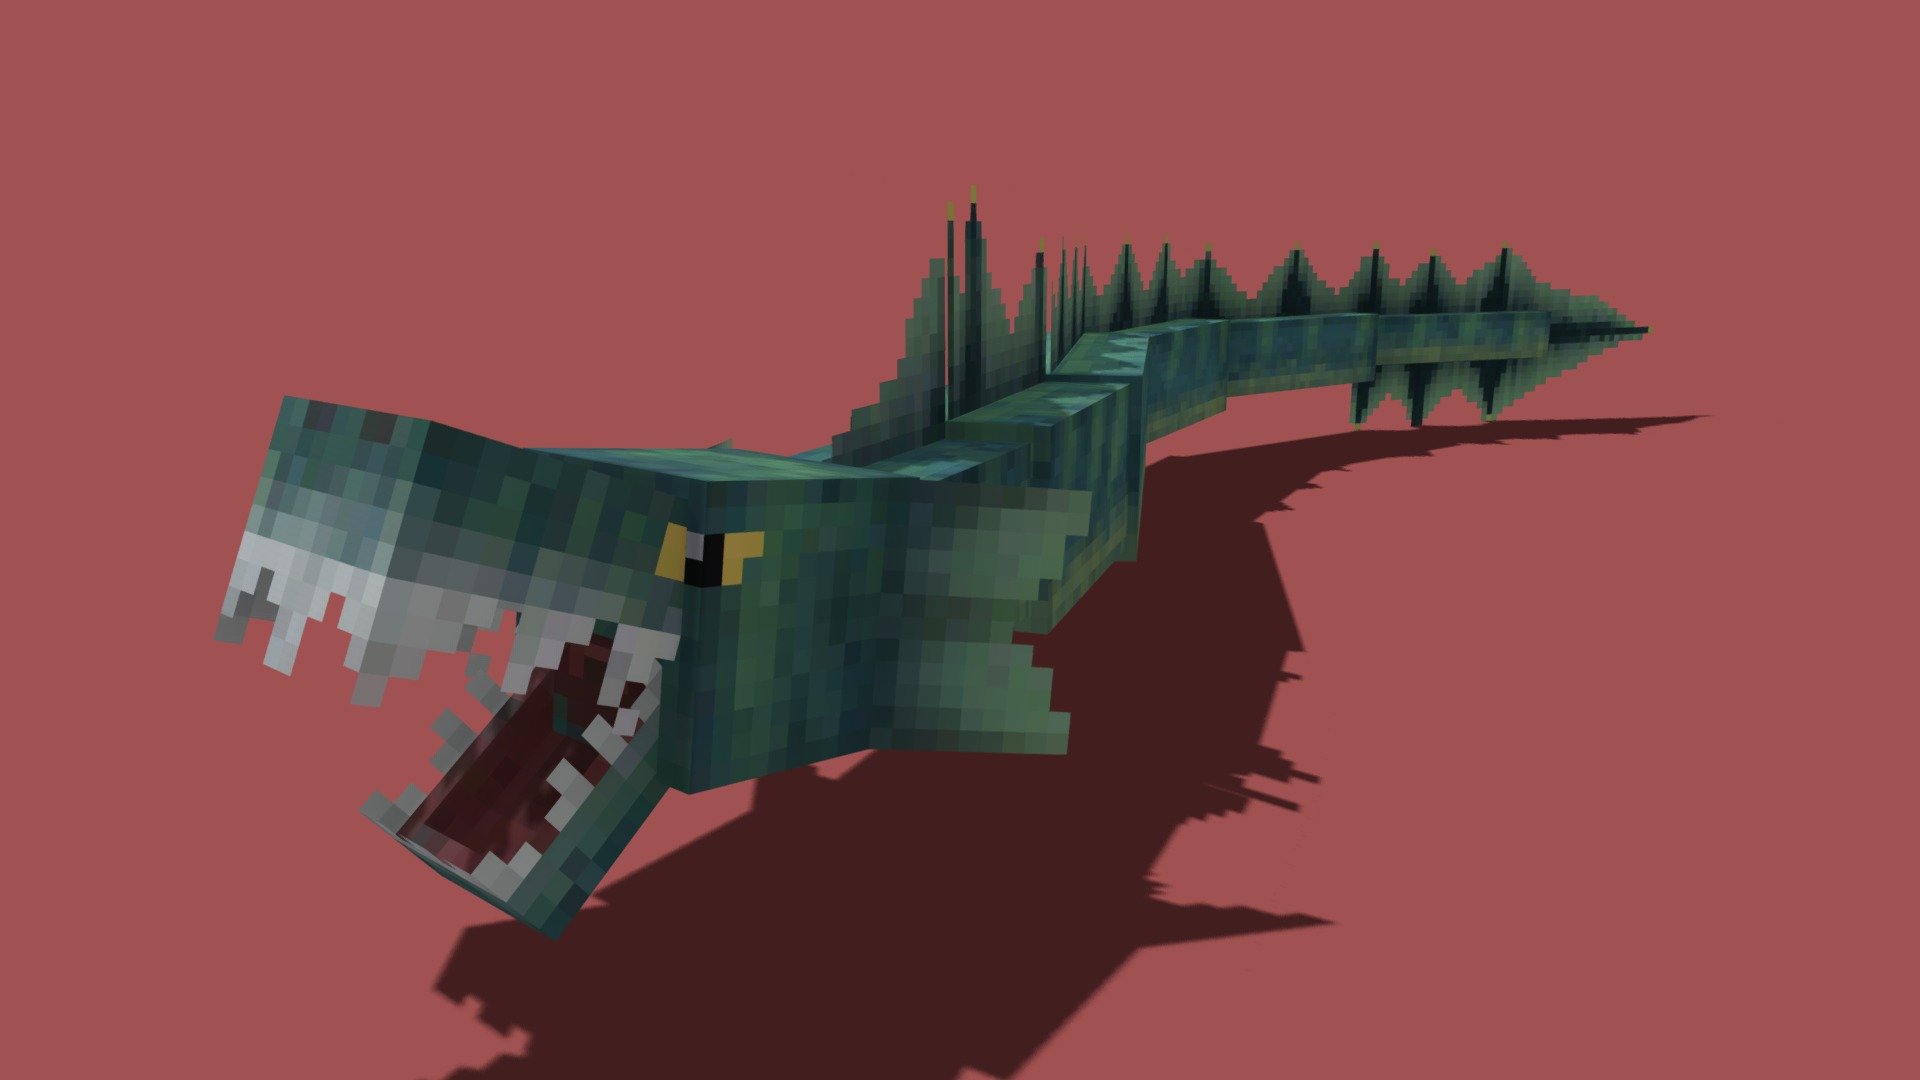 3D Model of a Sea Serpent for Minecraft: Bedrock Edition (otherwise known as MCPE, Minecraft for Windows 10 Edition).
Made by Raboy13

Twitter: https://twitter.com/thatraboy13
Instagram: https://www.instagram.com/that_raboy13/
YouTube: https://www.youtube.com/c/Raboy13 - Sea serpent - 3D model by Raboy (@thatraboy13) 3d model